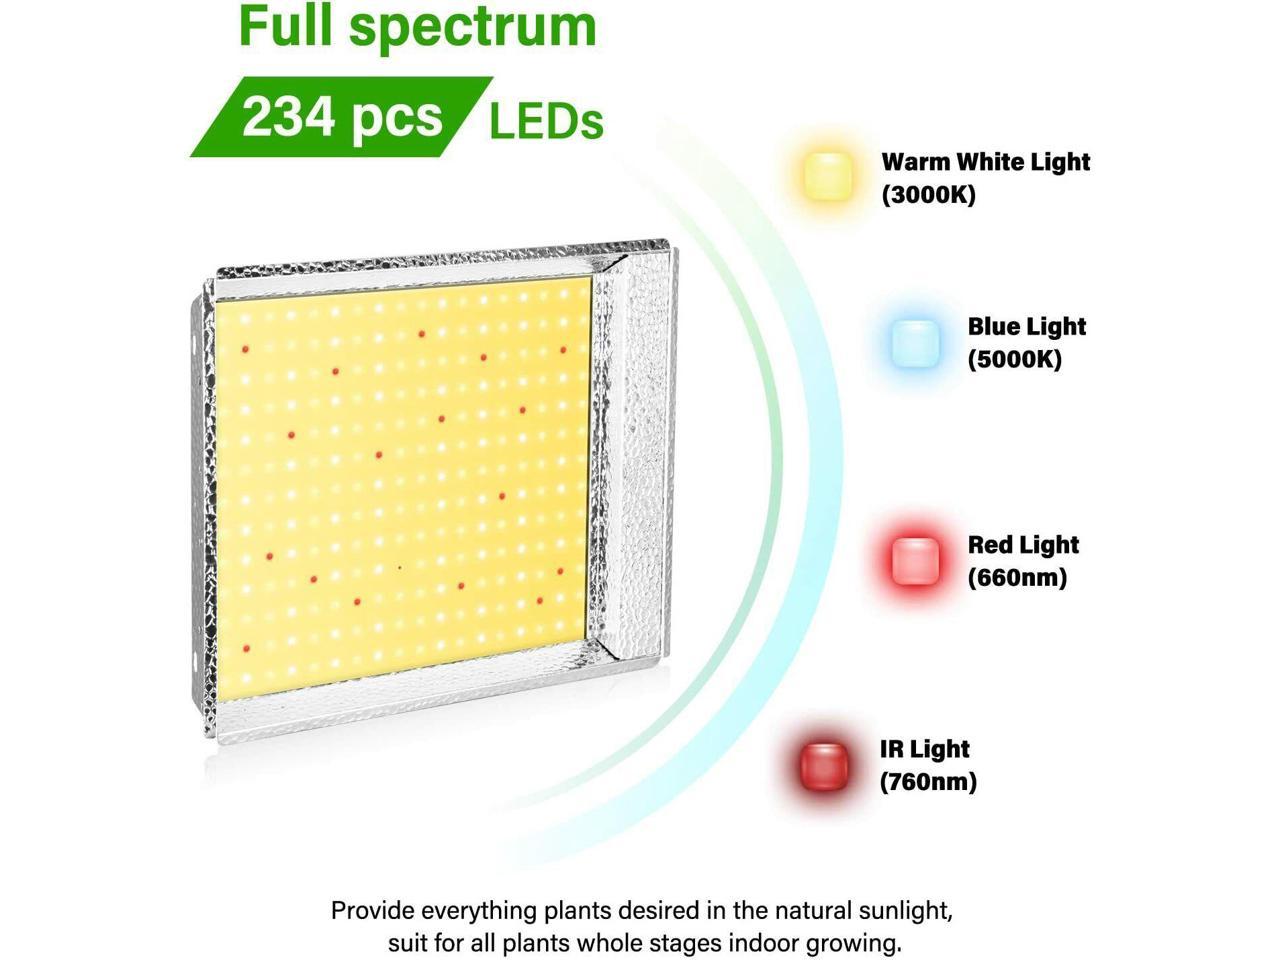 Details about   Sunlike 600W Dimmable Plant Led Grow Light Full Spectrum Grow Lamp Hydroponics 